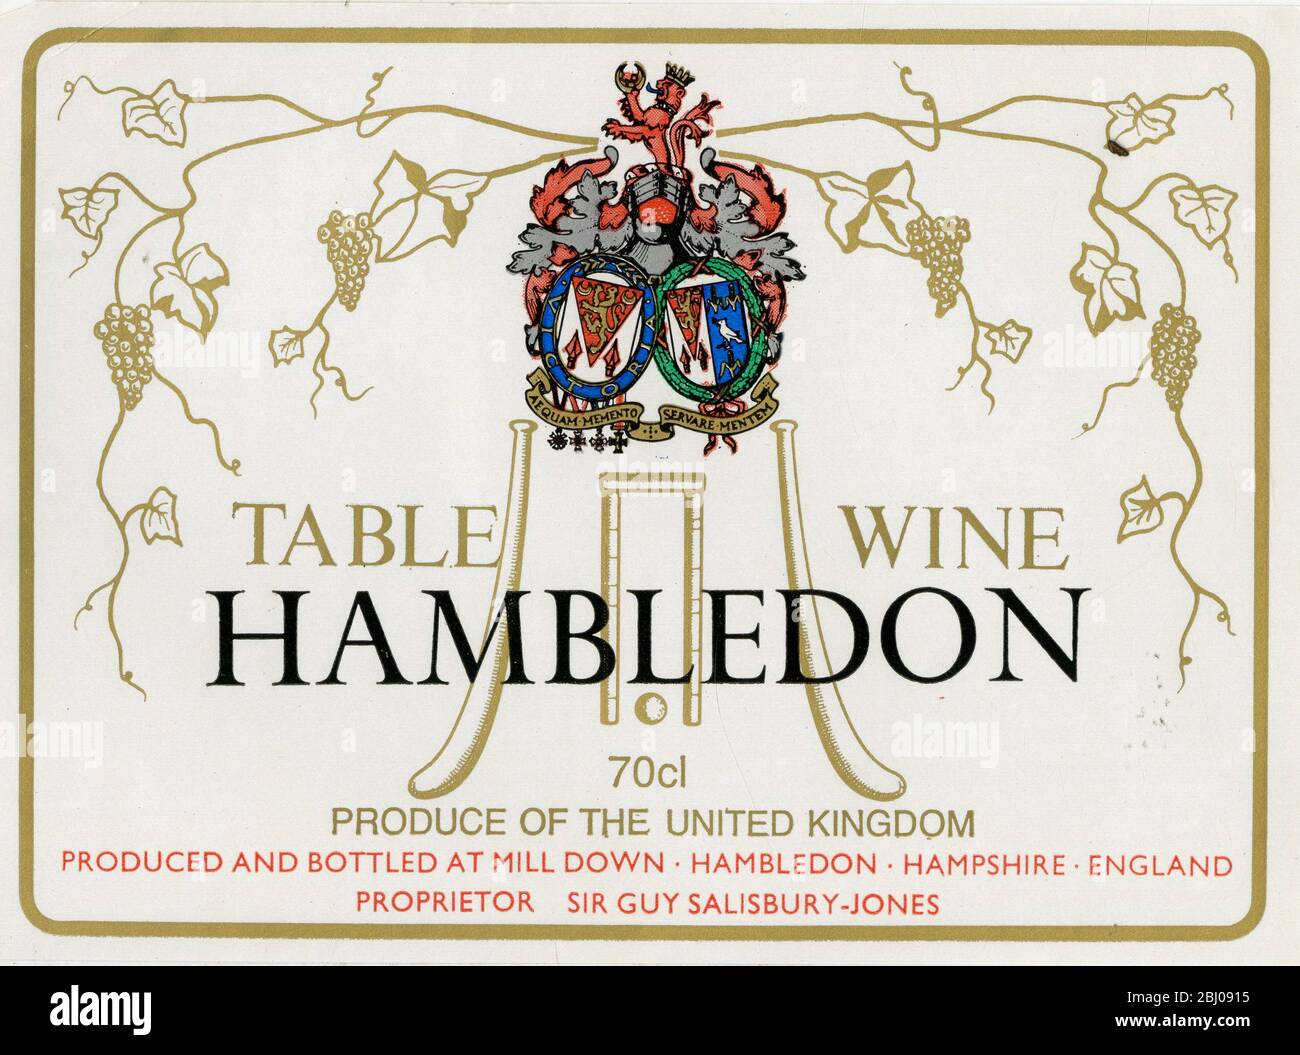 Wine label - Hambledon Wine. A wine blend of Chardonnay grape and Pinot Meunier. Produced and bottled by Sir Guy and Lady Salisbury - Jones at a vineyard in Hambledon, Hampshire. - 1976 Stock Photo